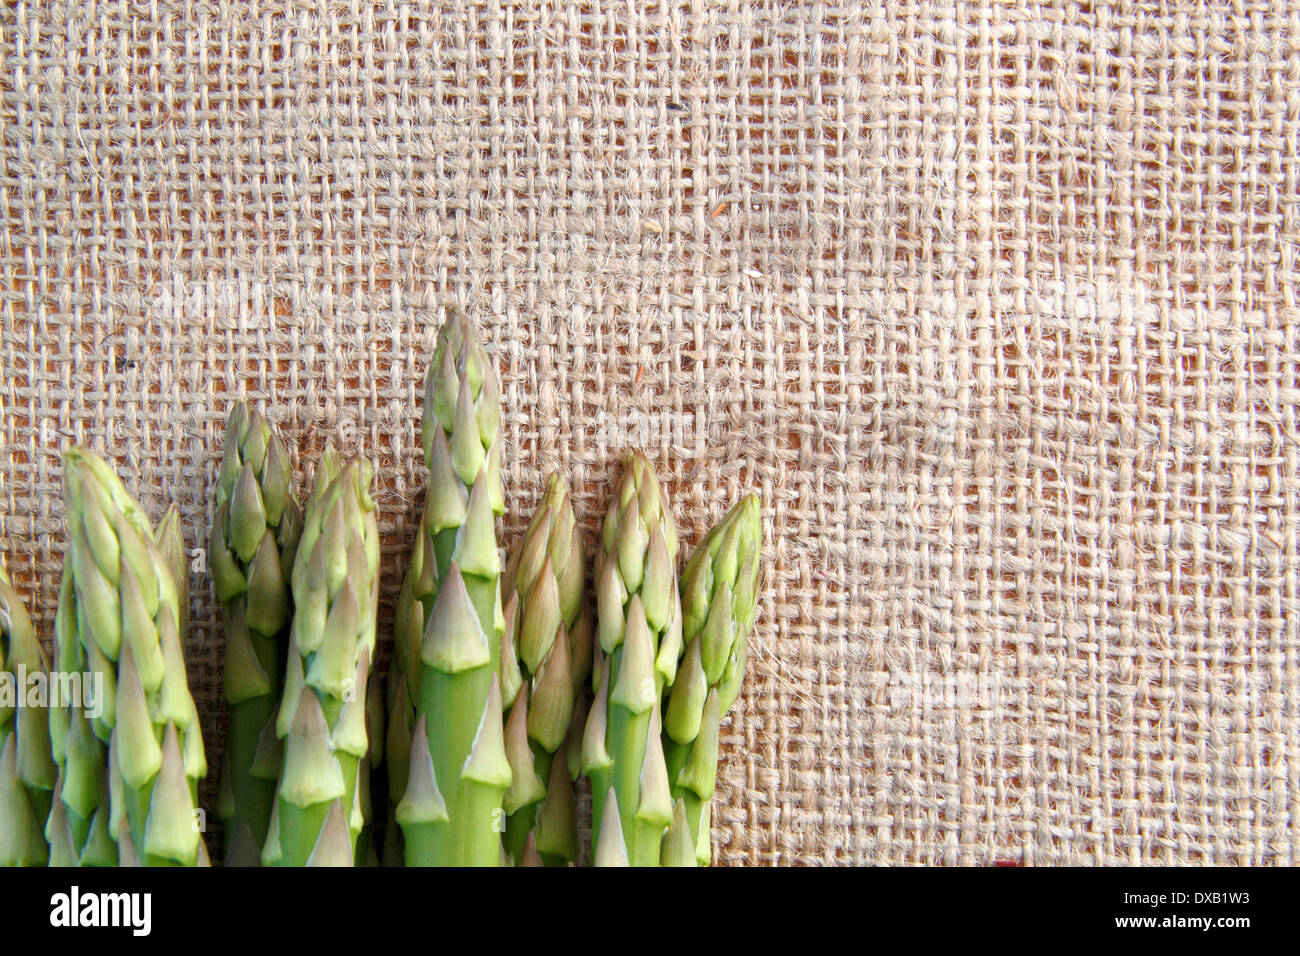 Fresh green asparagus tips (asparagus officinalis) against hessian cloth background, UK - wih copy space Stock Photo